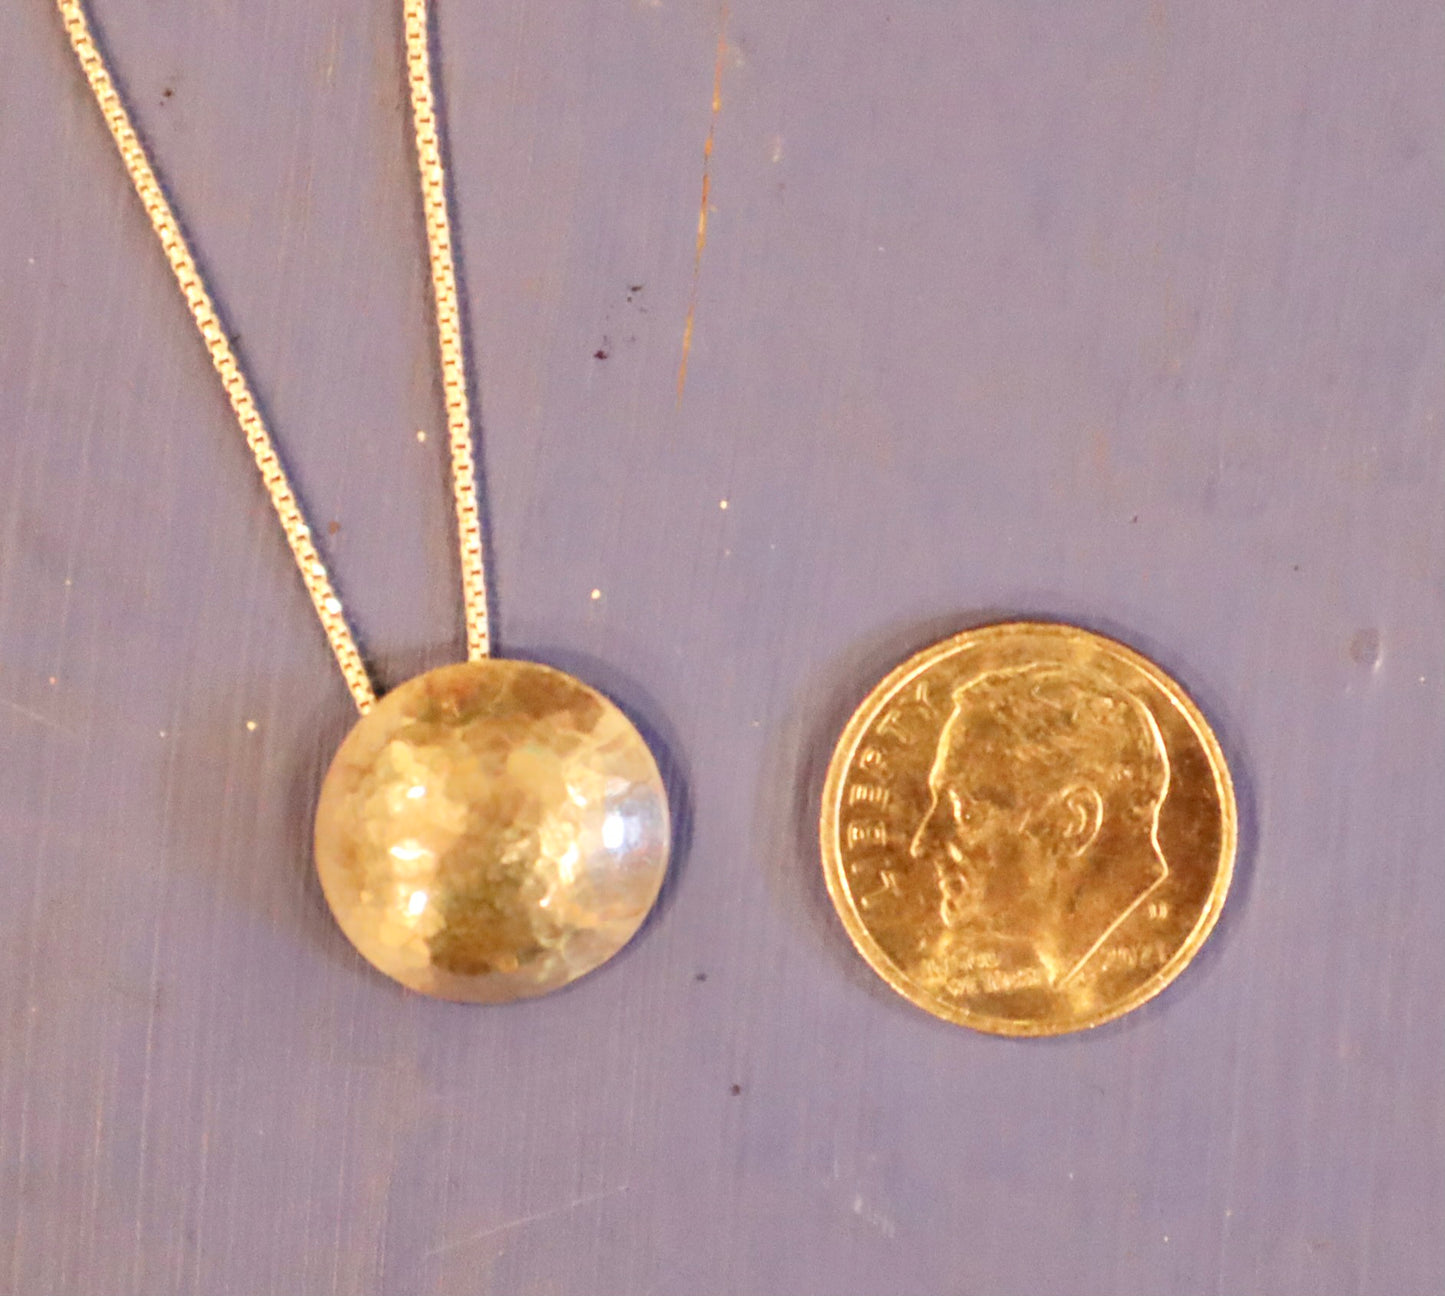 "The Dime" sterling silver necklace